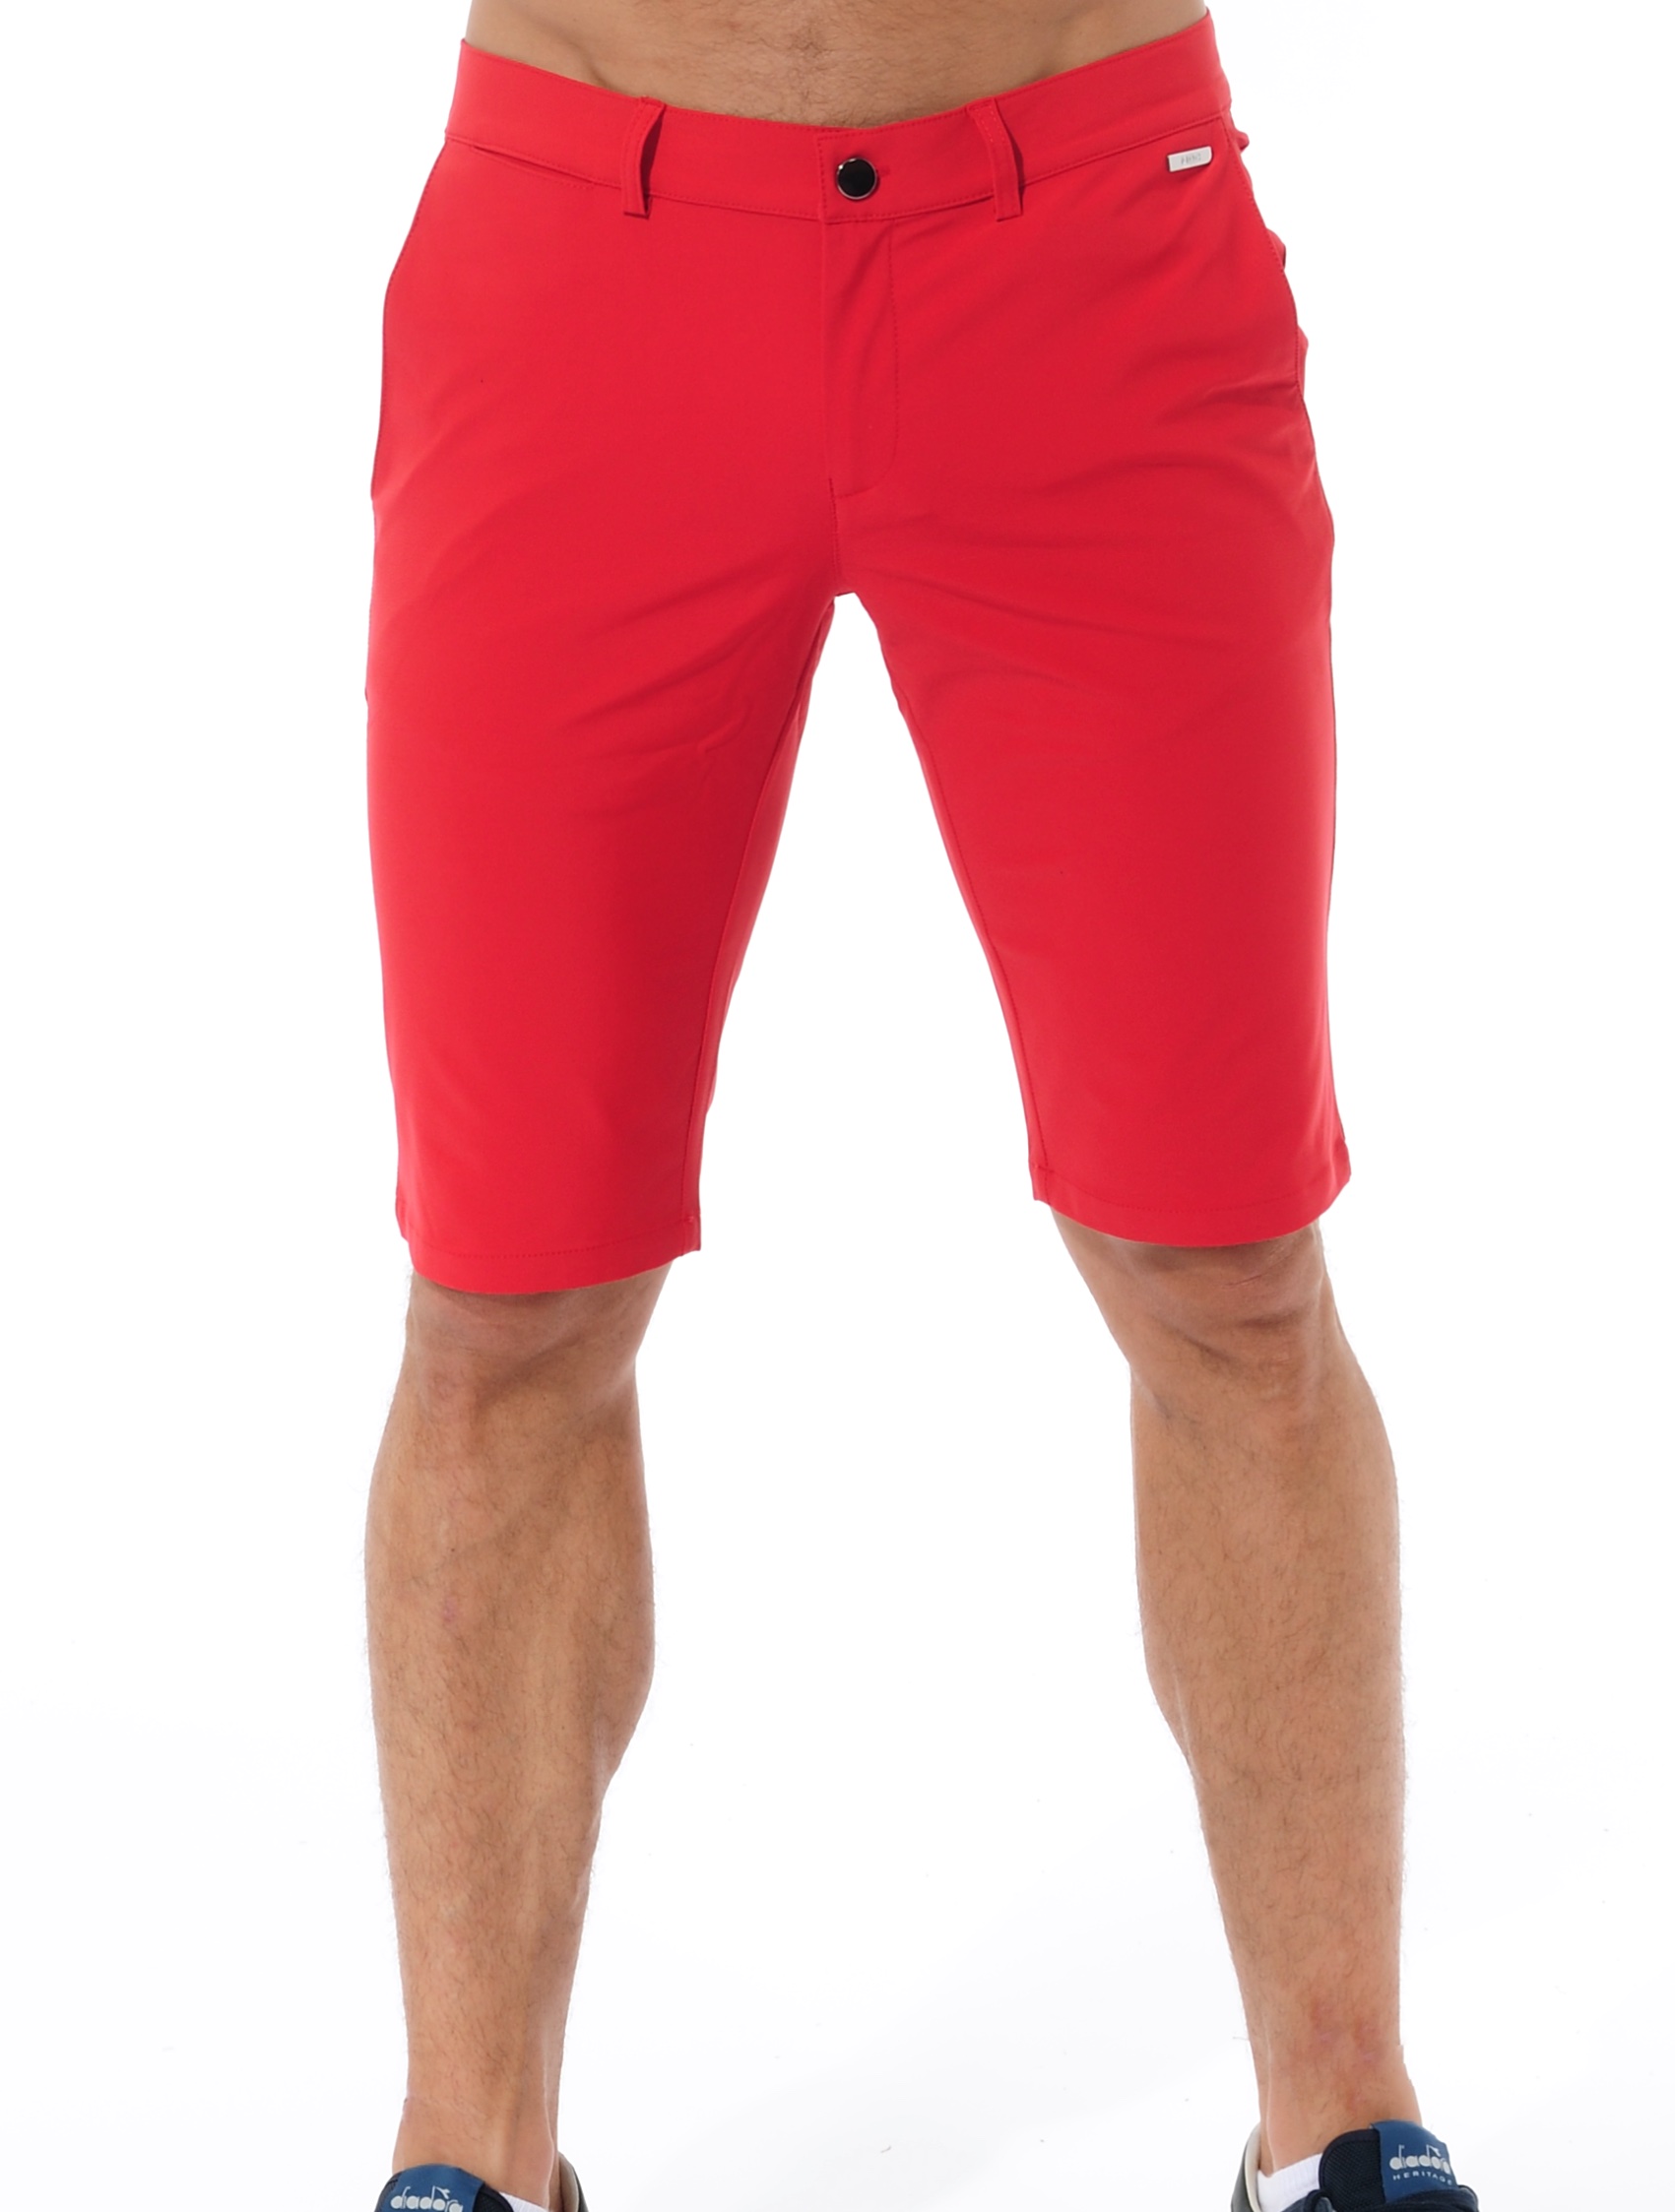 4way stretch shorts red 